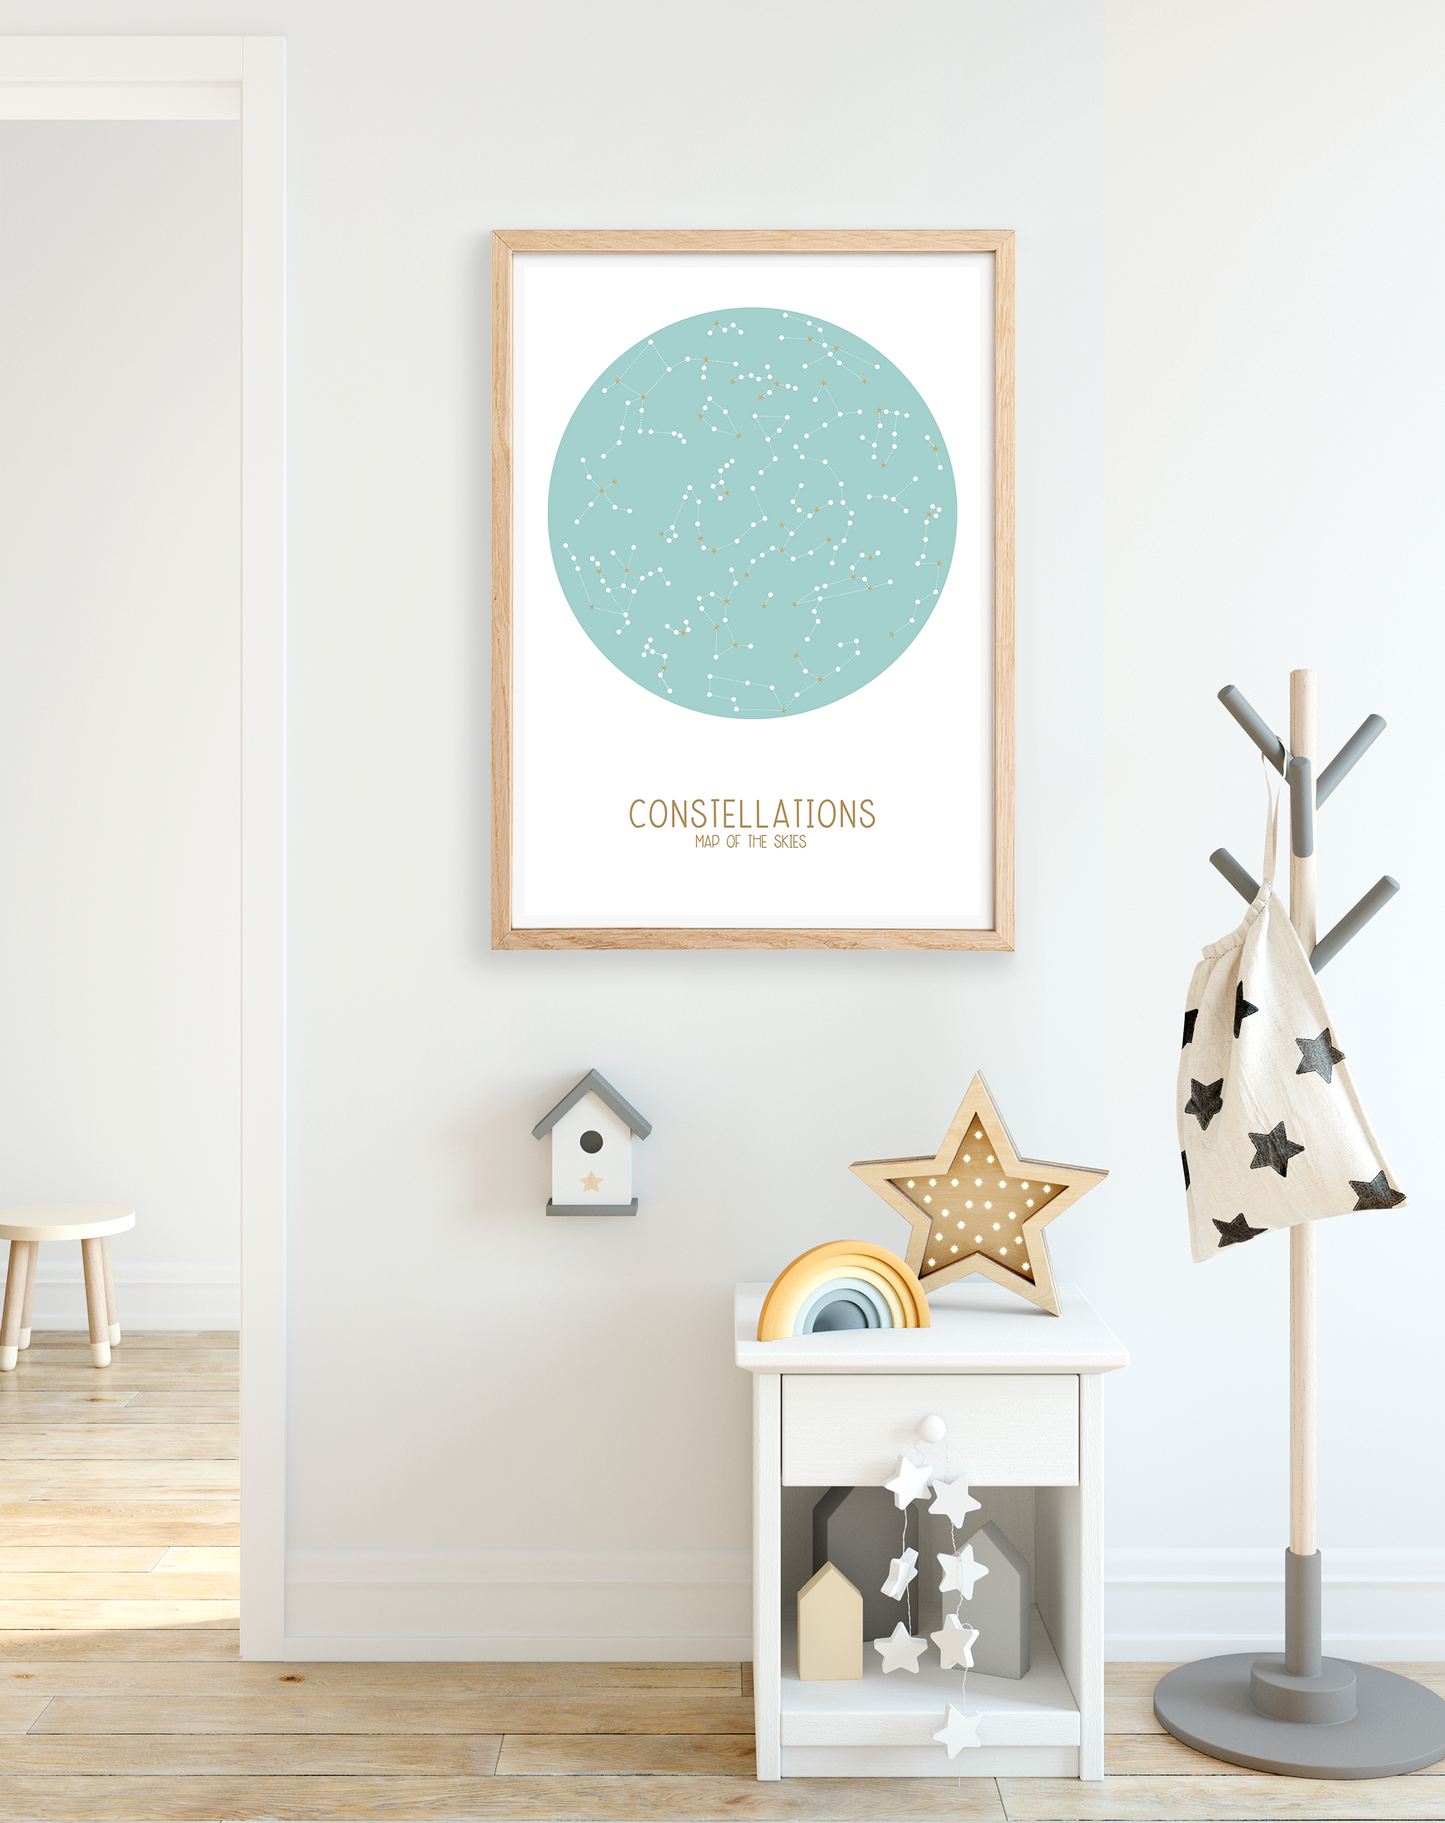 Constellations, map of the skies in teal print